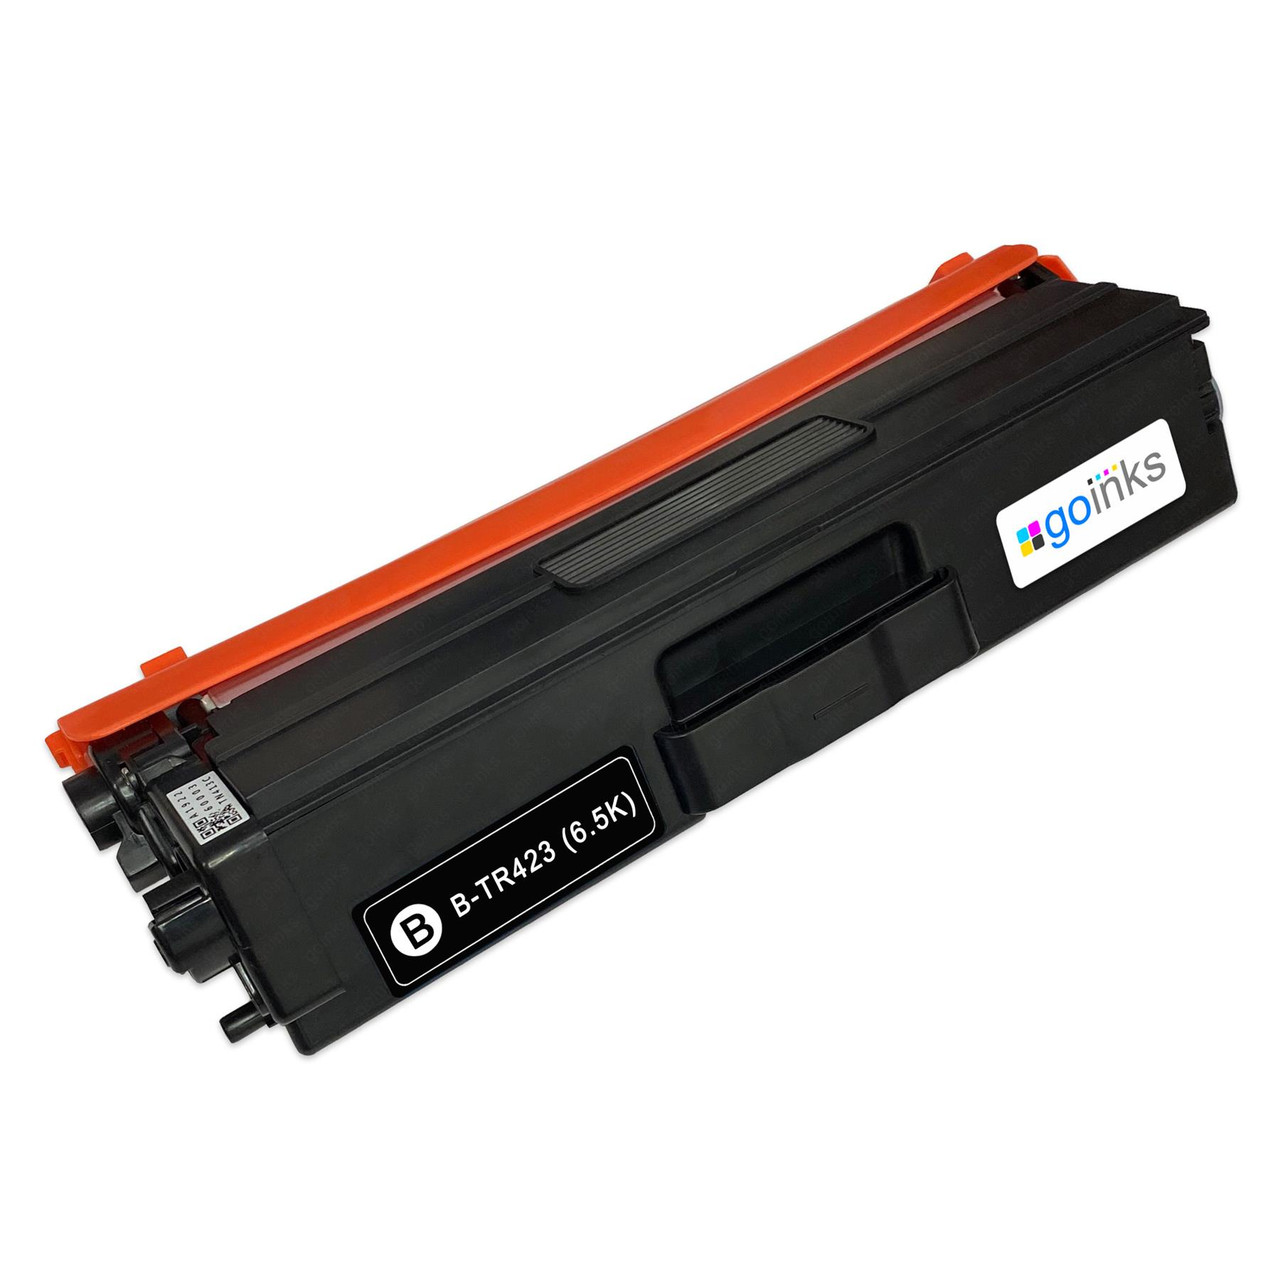 BROTHER TN423 BLACK TONER CARTRIDGE 6500 PAGES